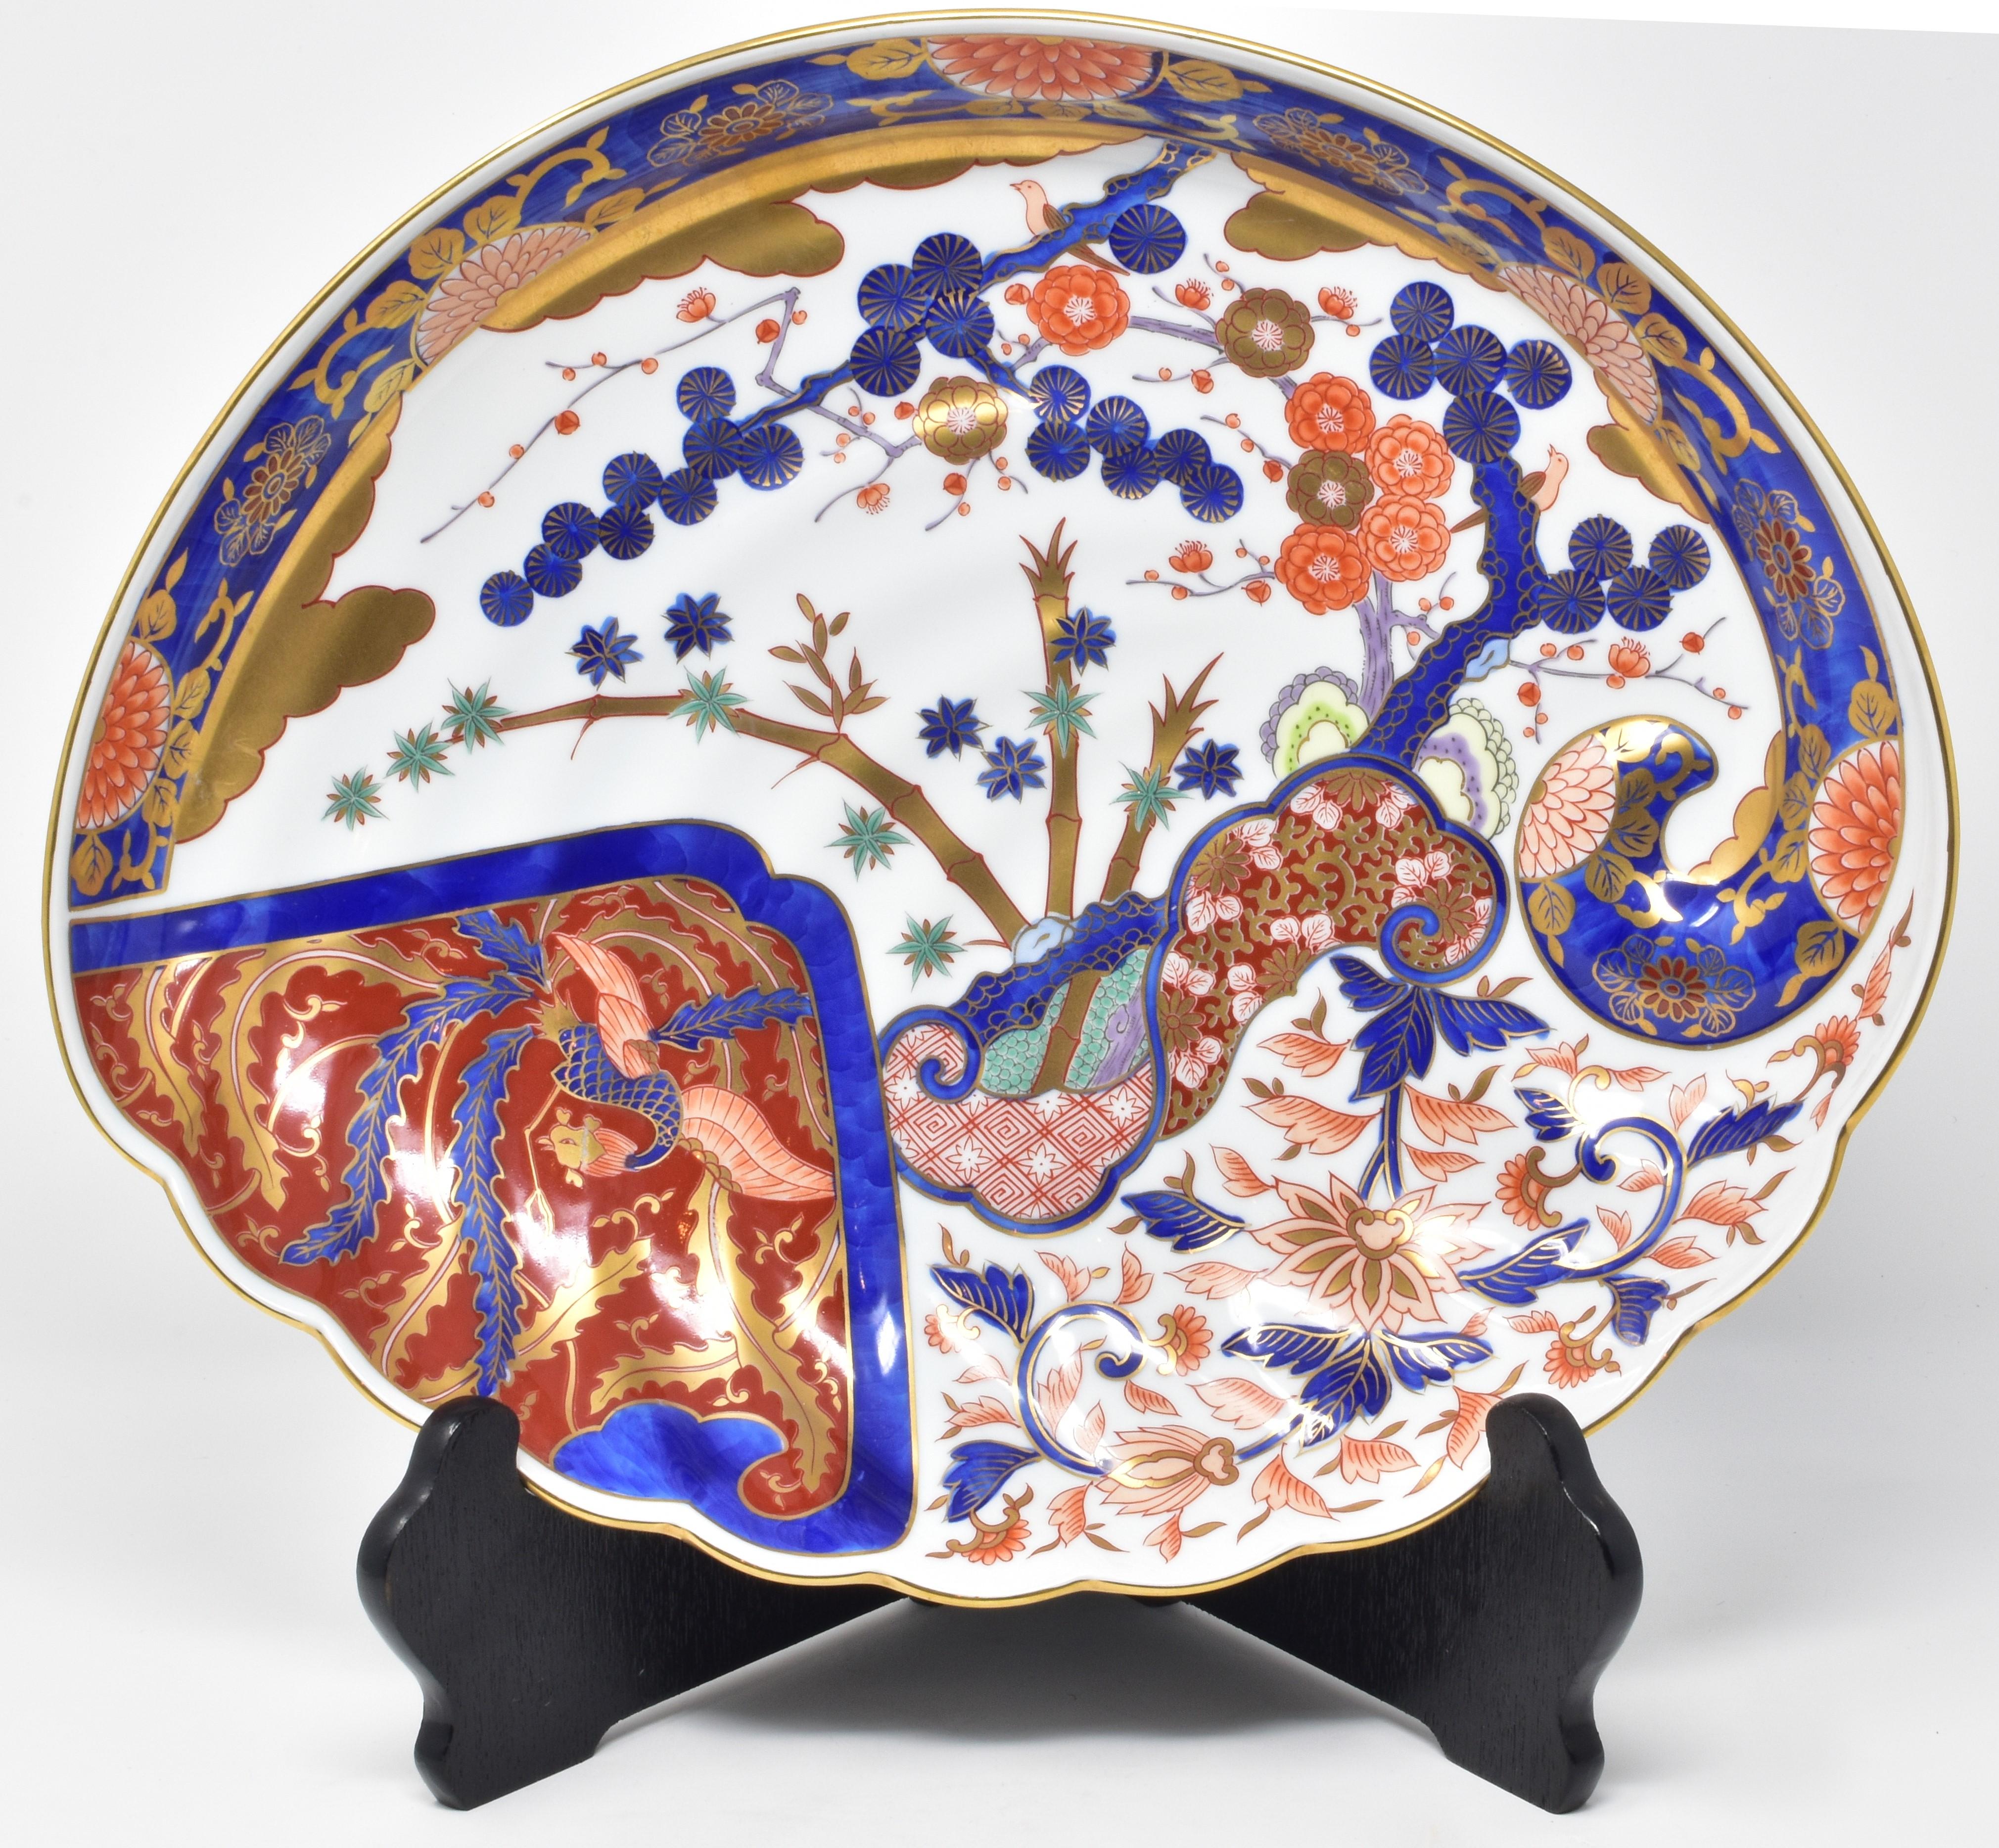 Contemporary Japanese Gilded Imari Blue Red Decorative Porcelain Charger 1